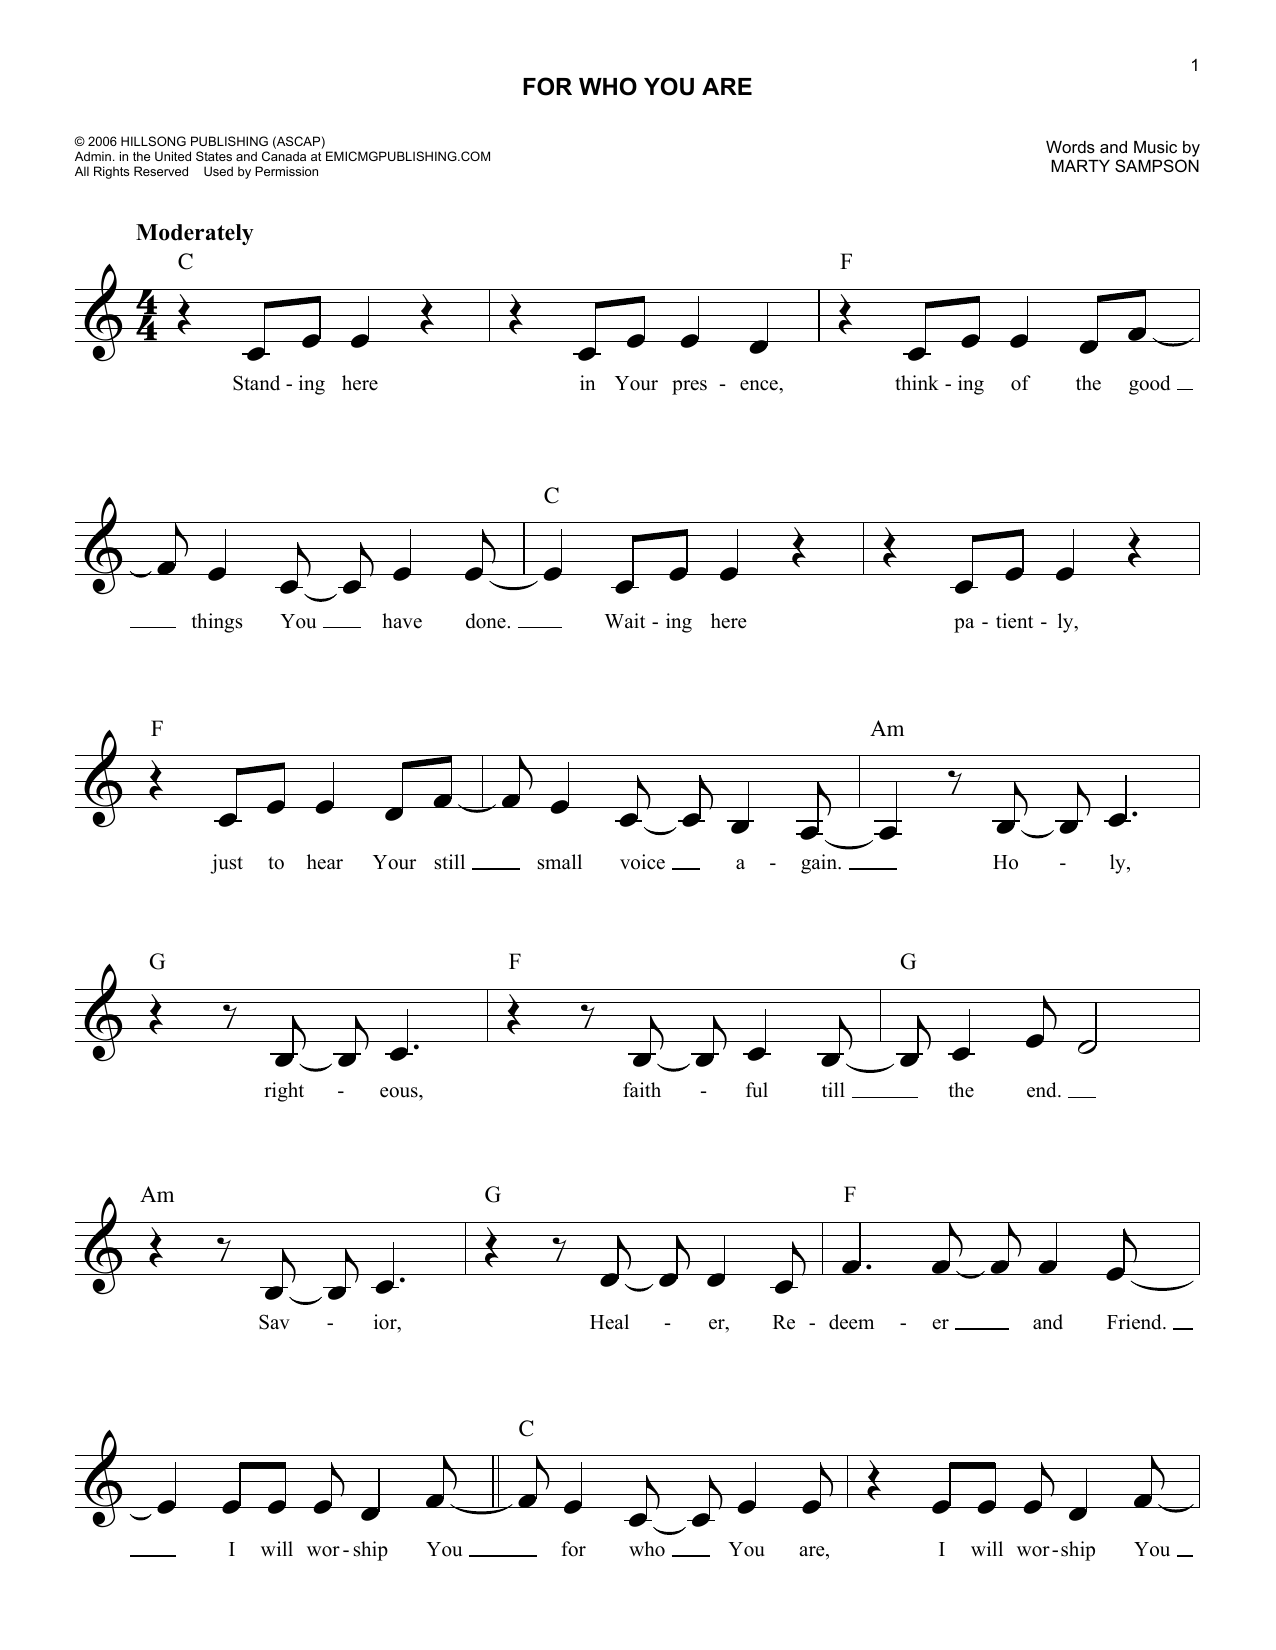 Download Marty Sampson For Who You Are Sheet Music